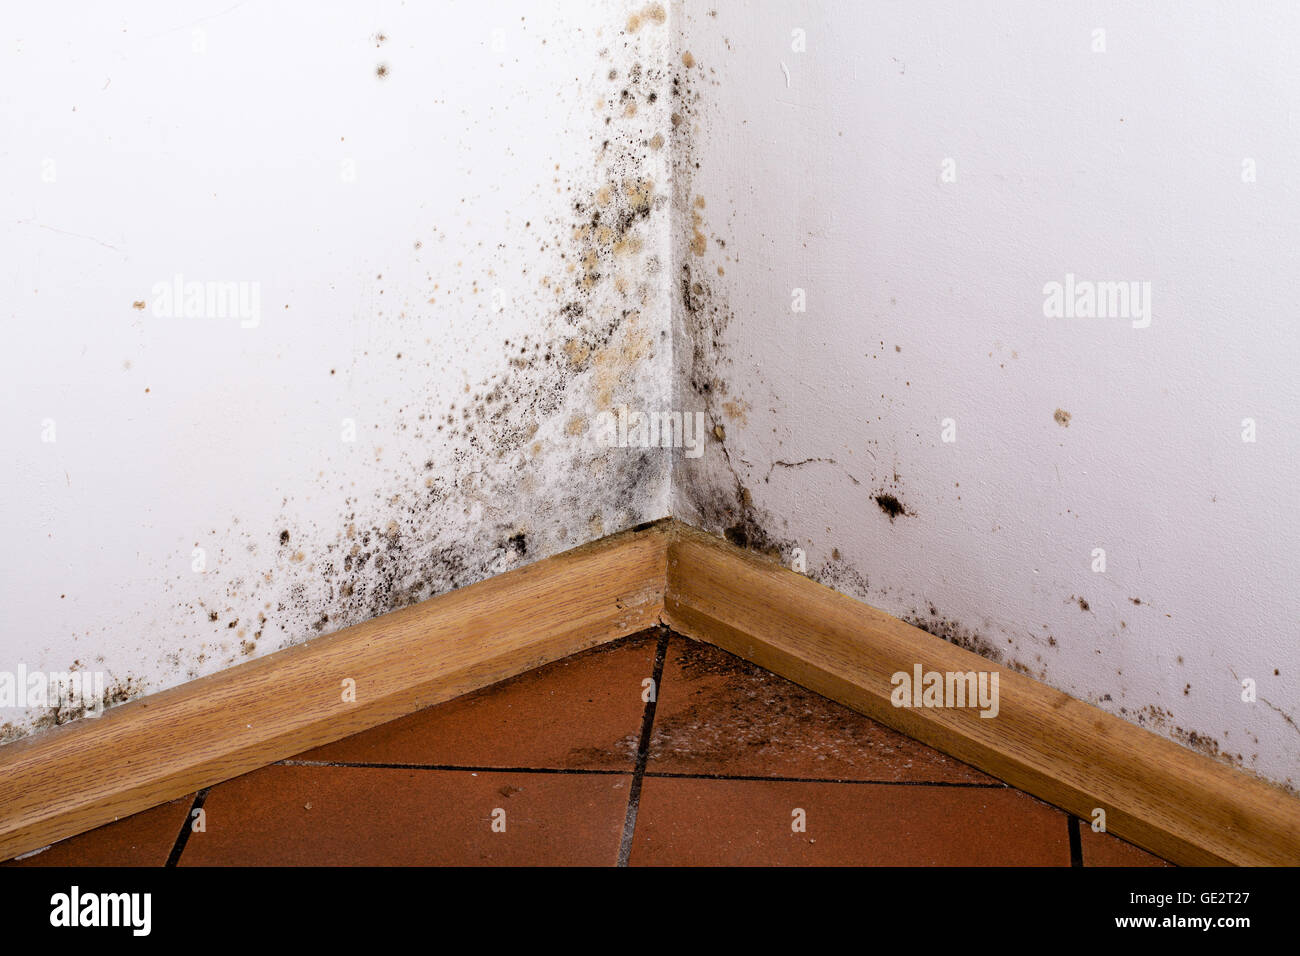 Black Mold In The Corner Of Room Wall Stock Photo 111930175 Alamy